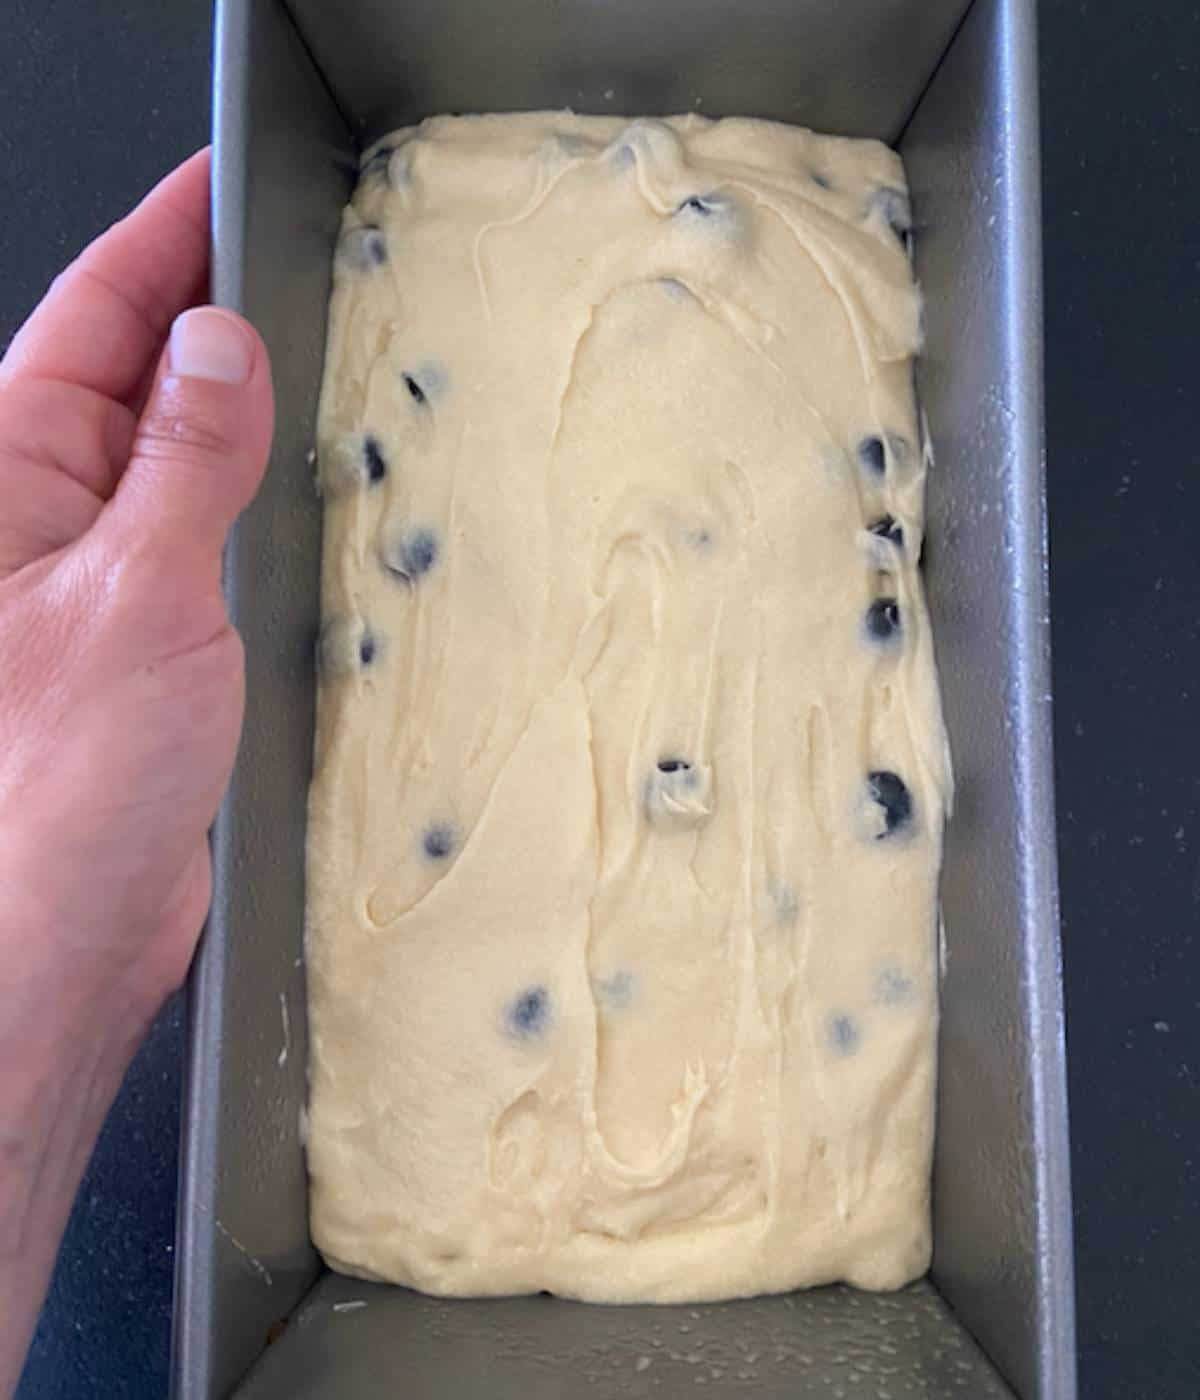 Blueberry pound cake batter in loaf pan.